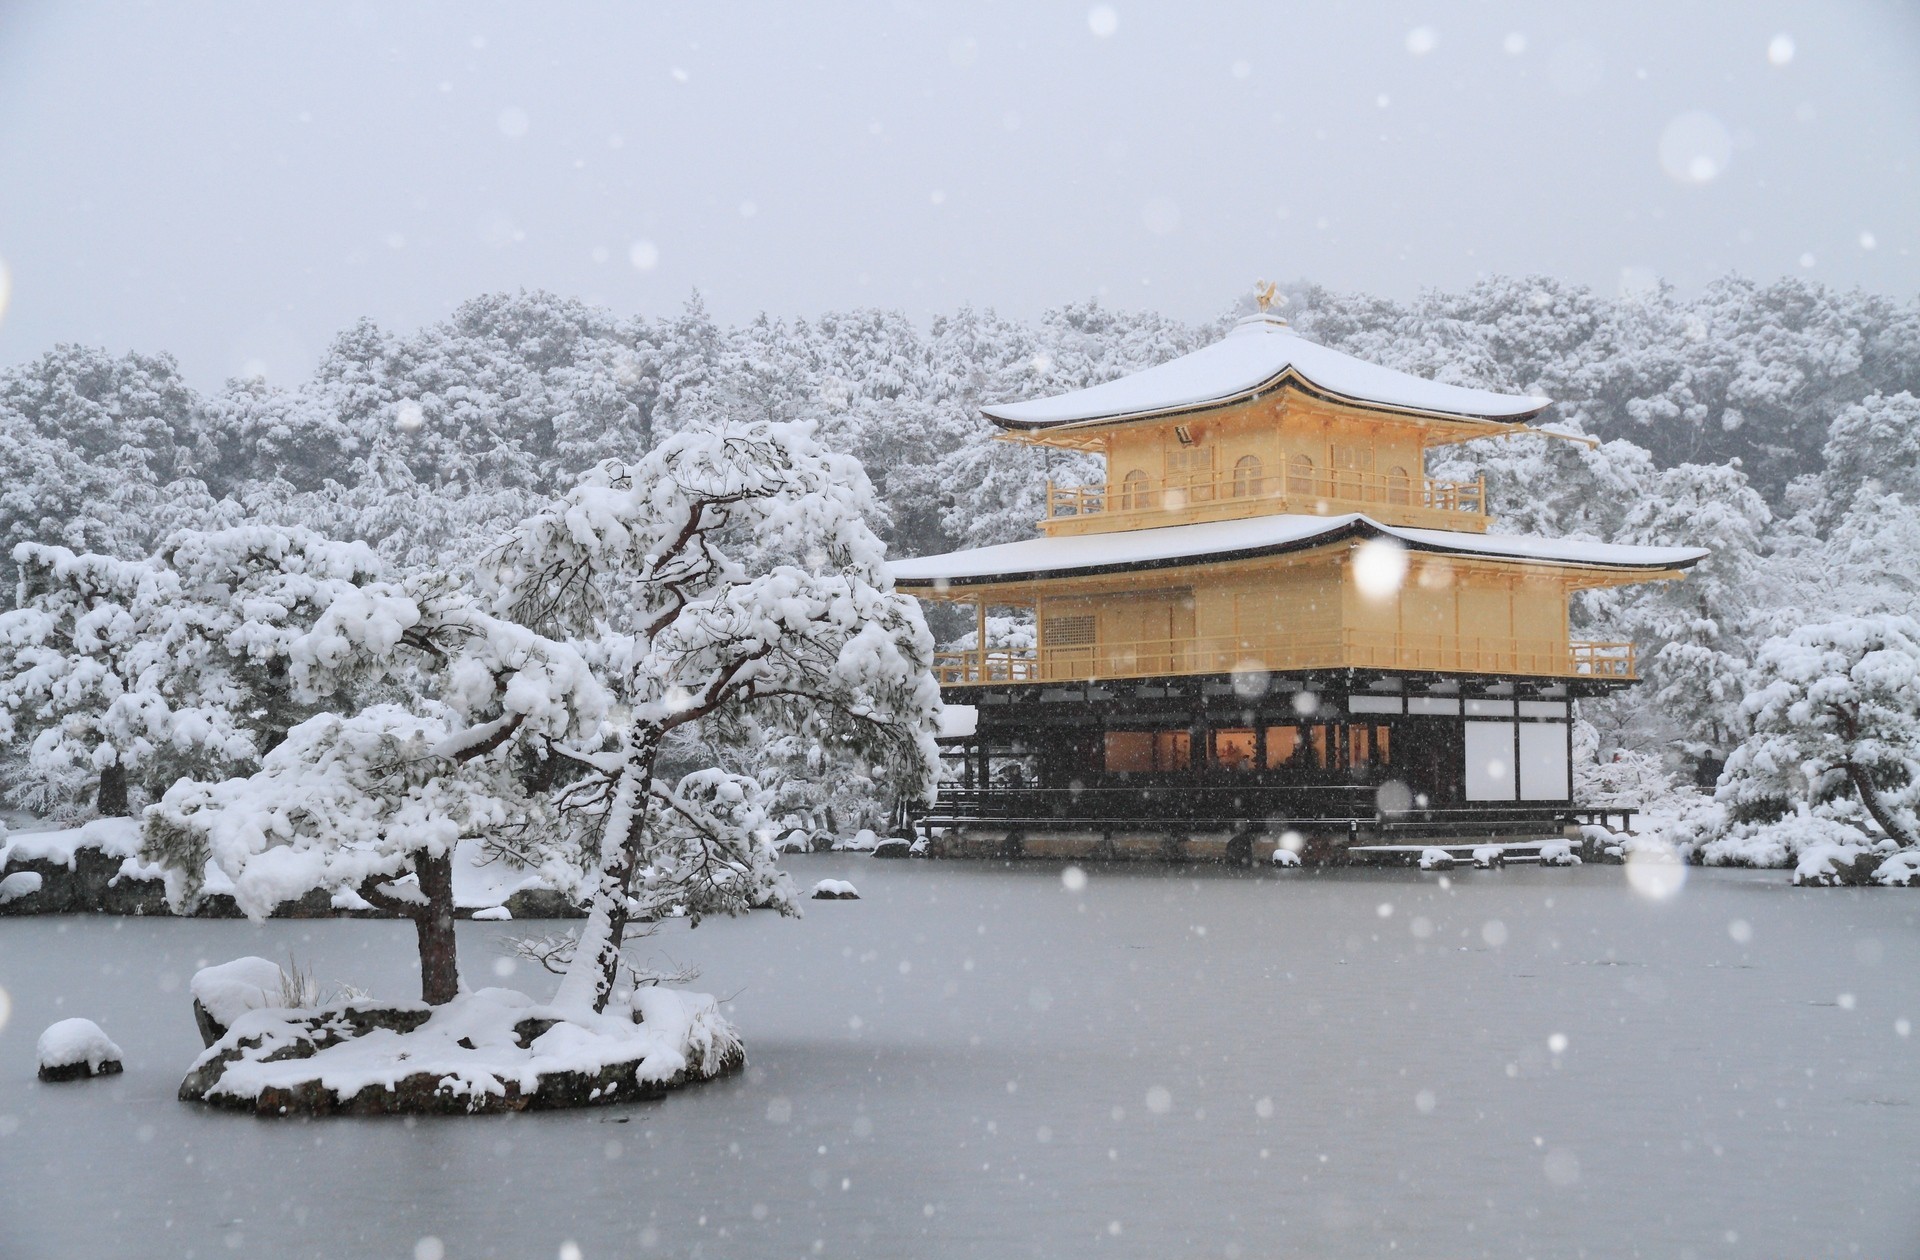 Popular The Temple Of The Golden Pavilion 4K for smartphone